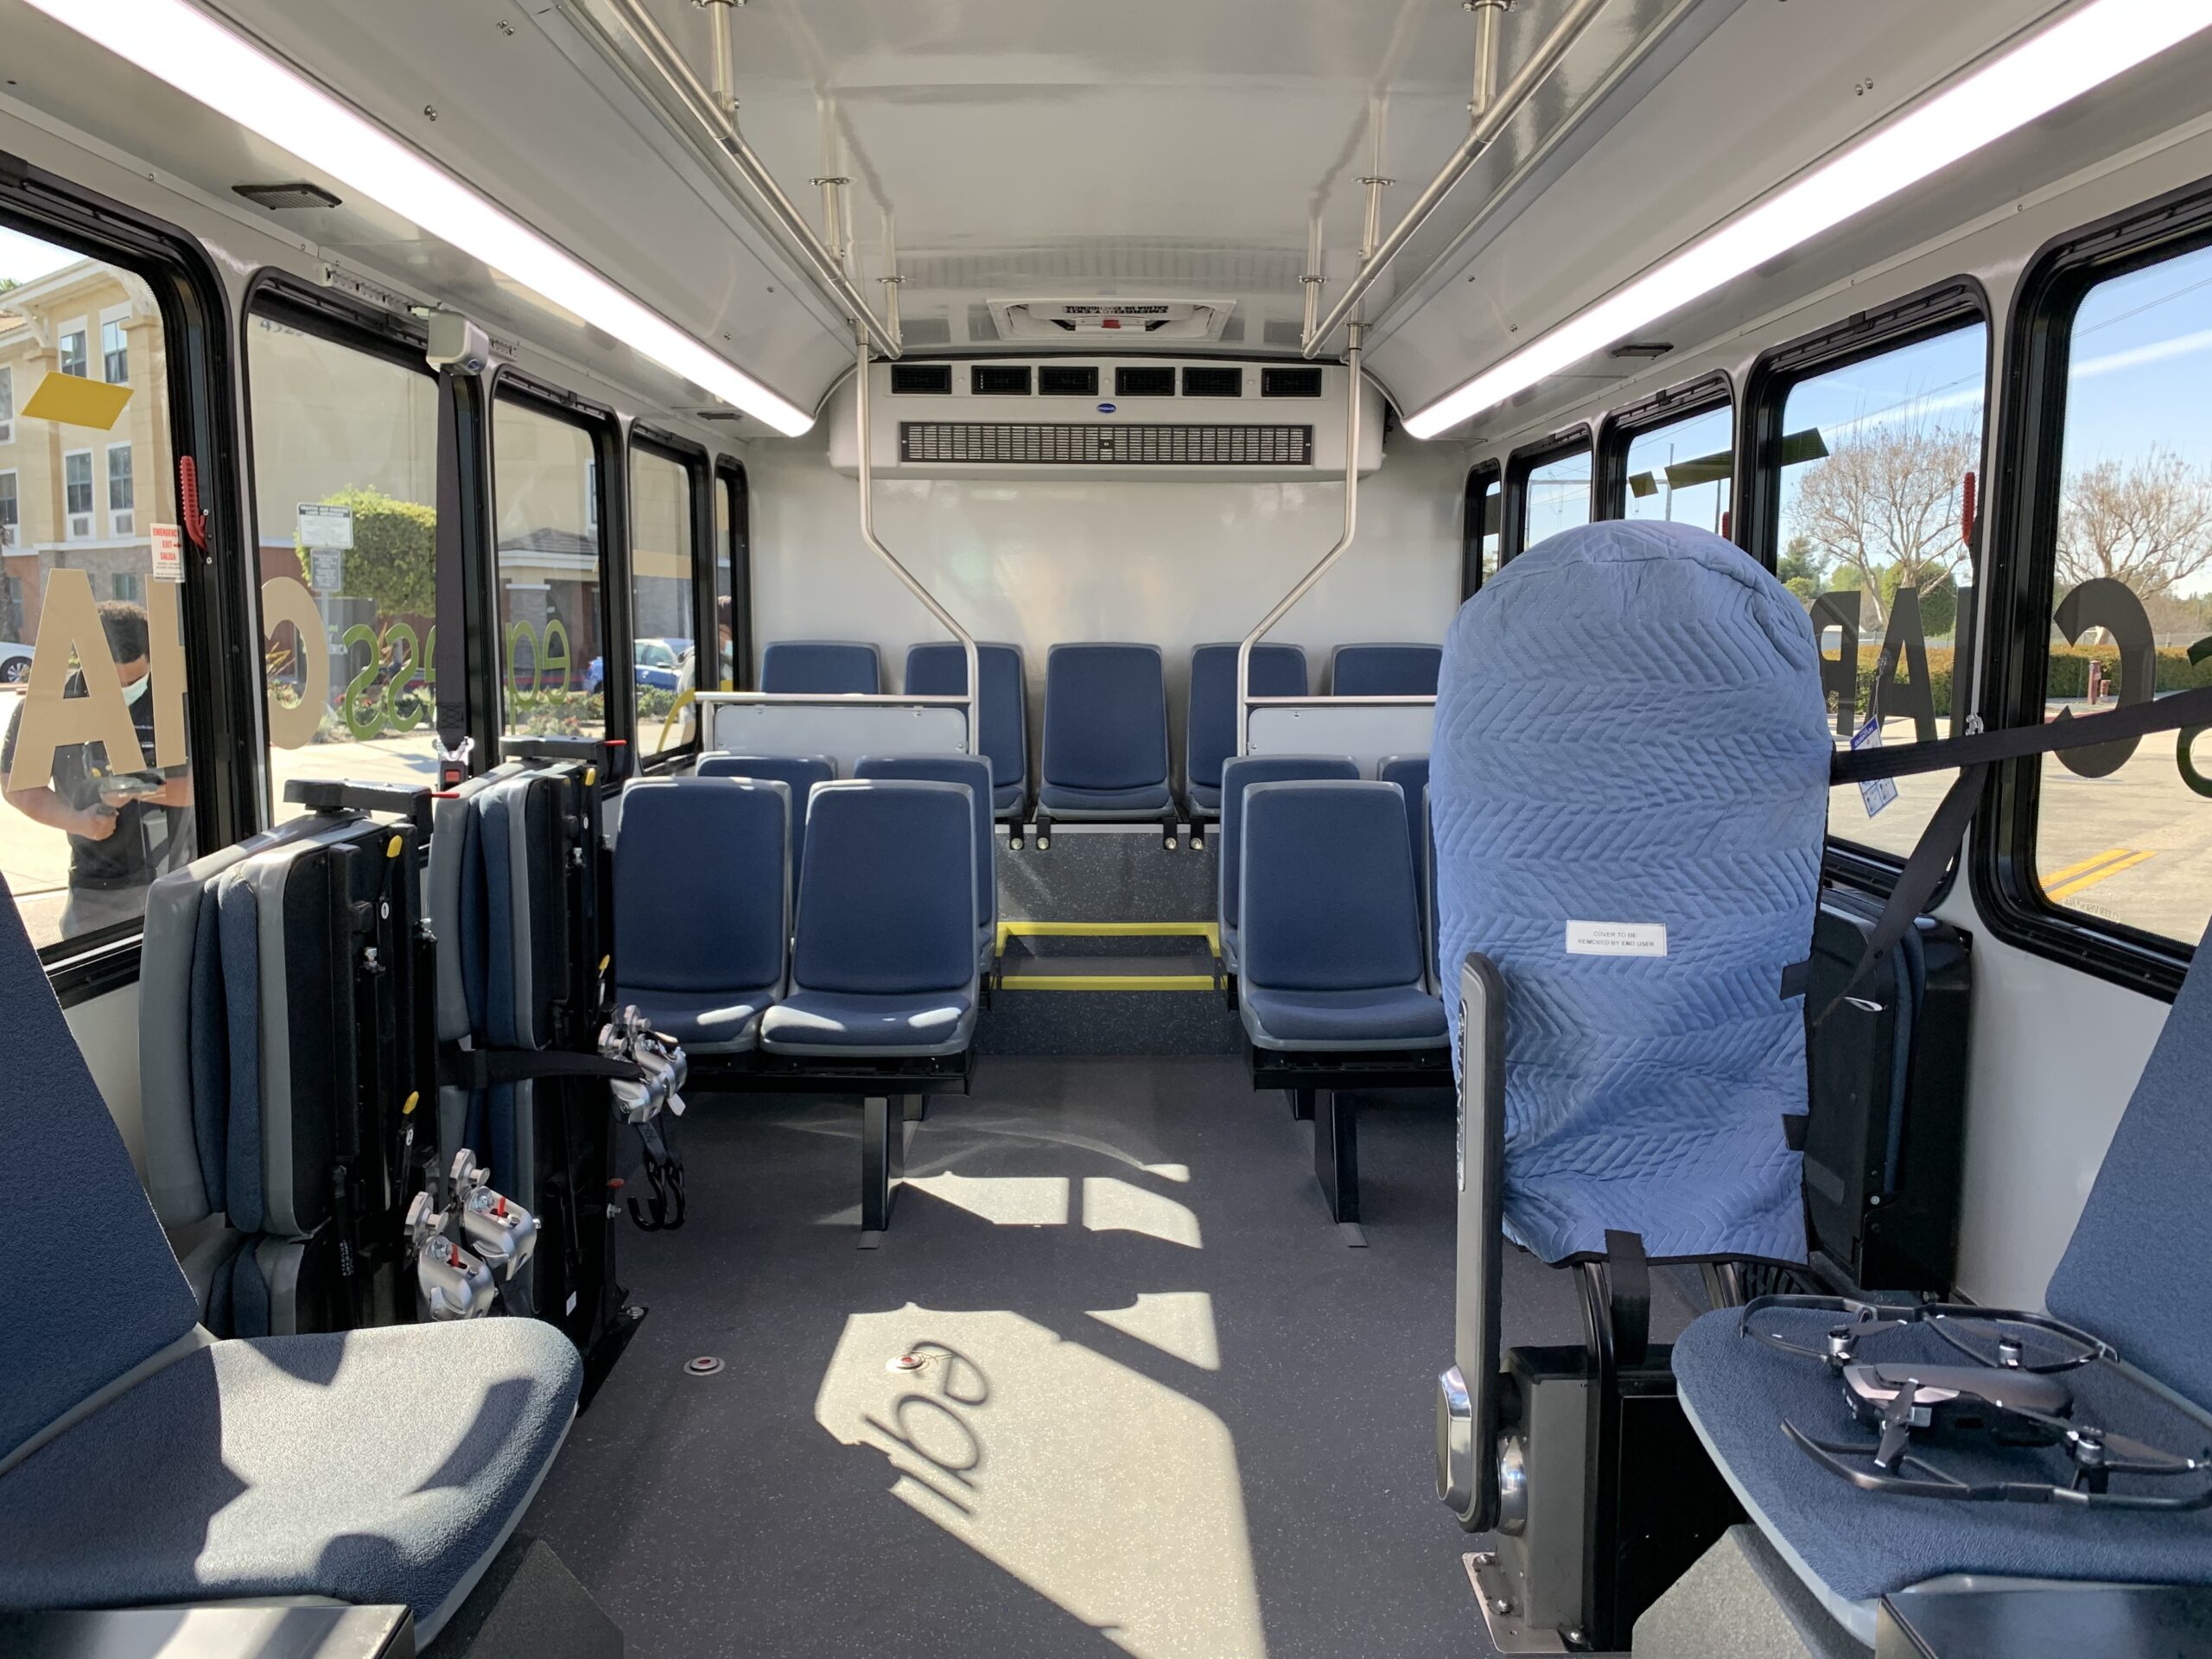 The 2021 ARBOC Equess CHARGE bus with blue seats.